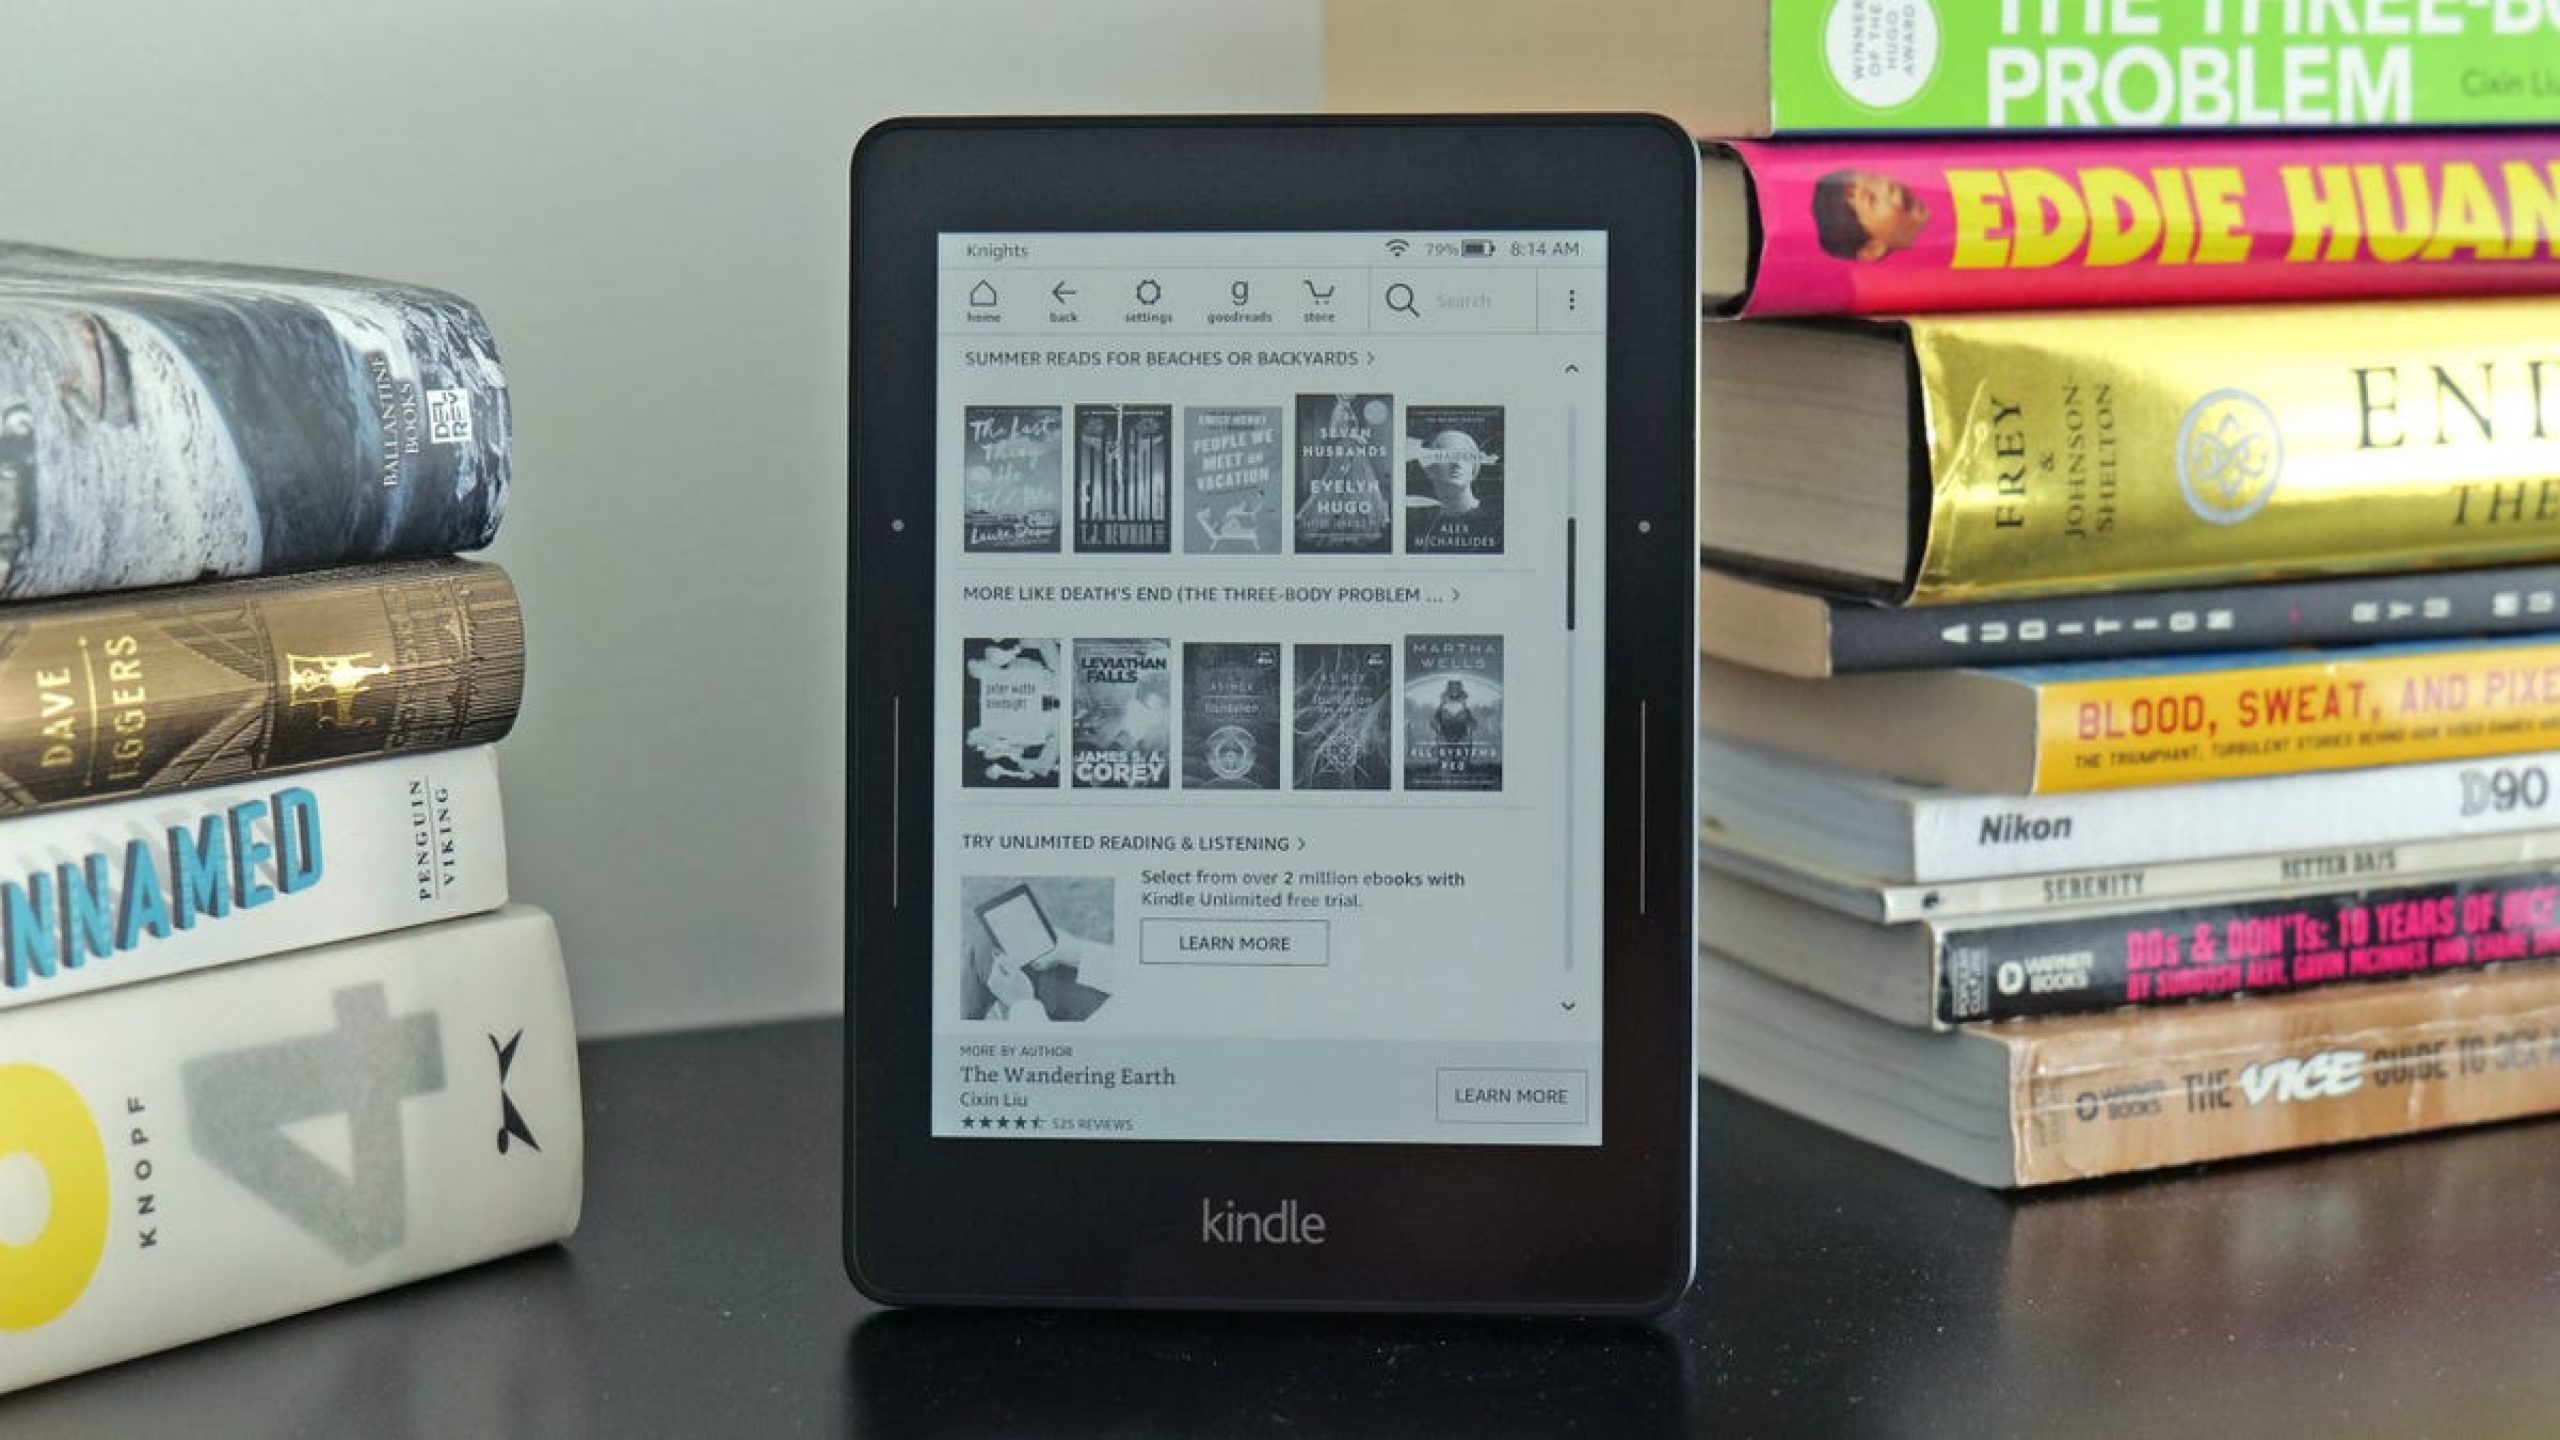 Amazon Warns That Older Kindles May Start Losing Cellular Service Later This Year